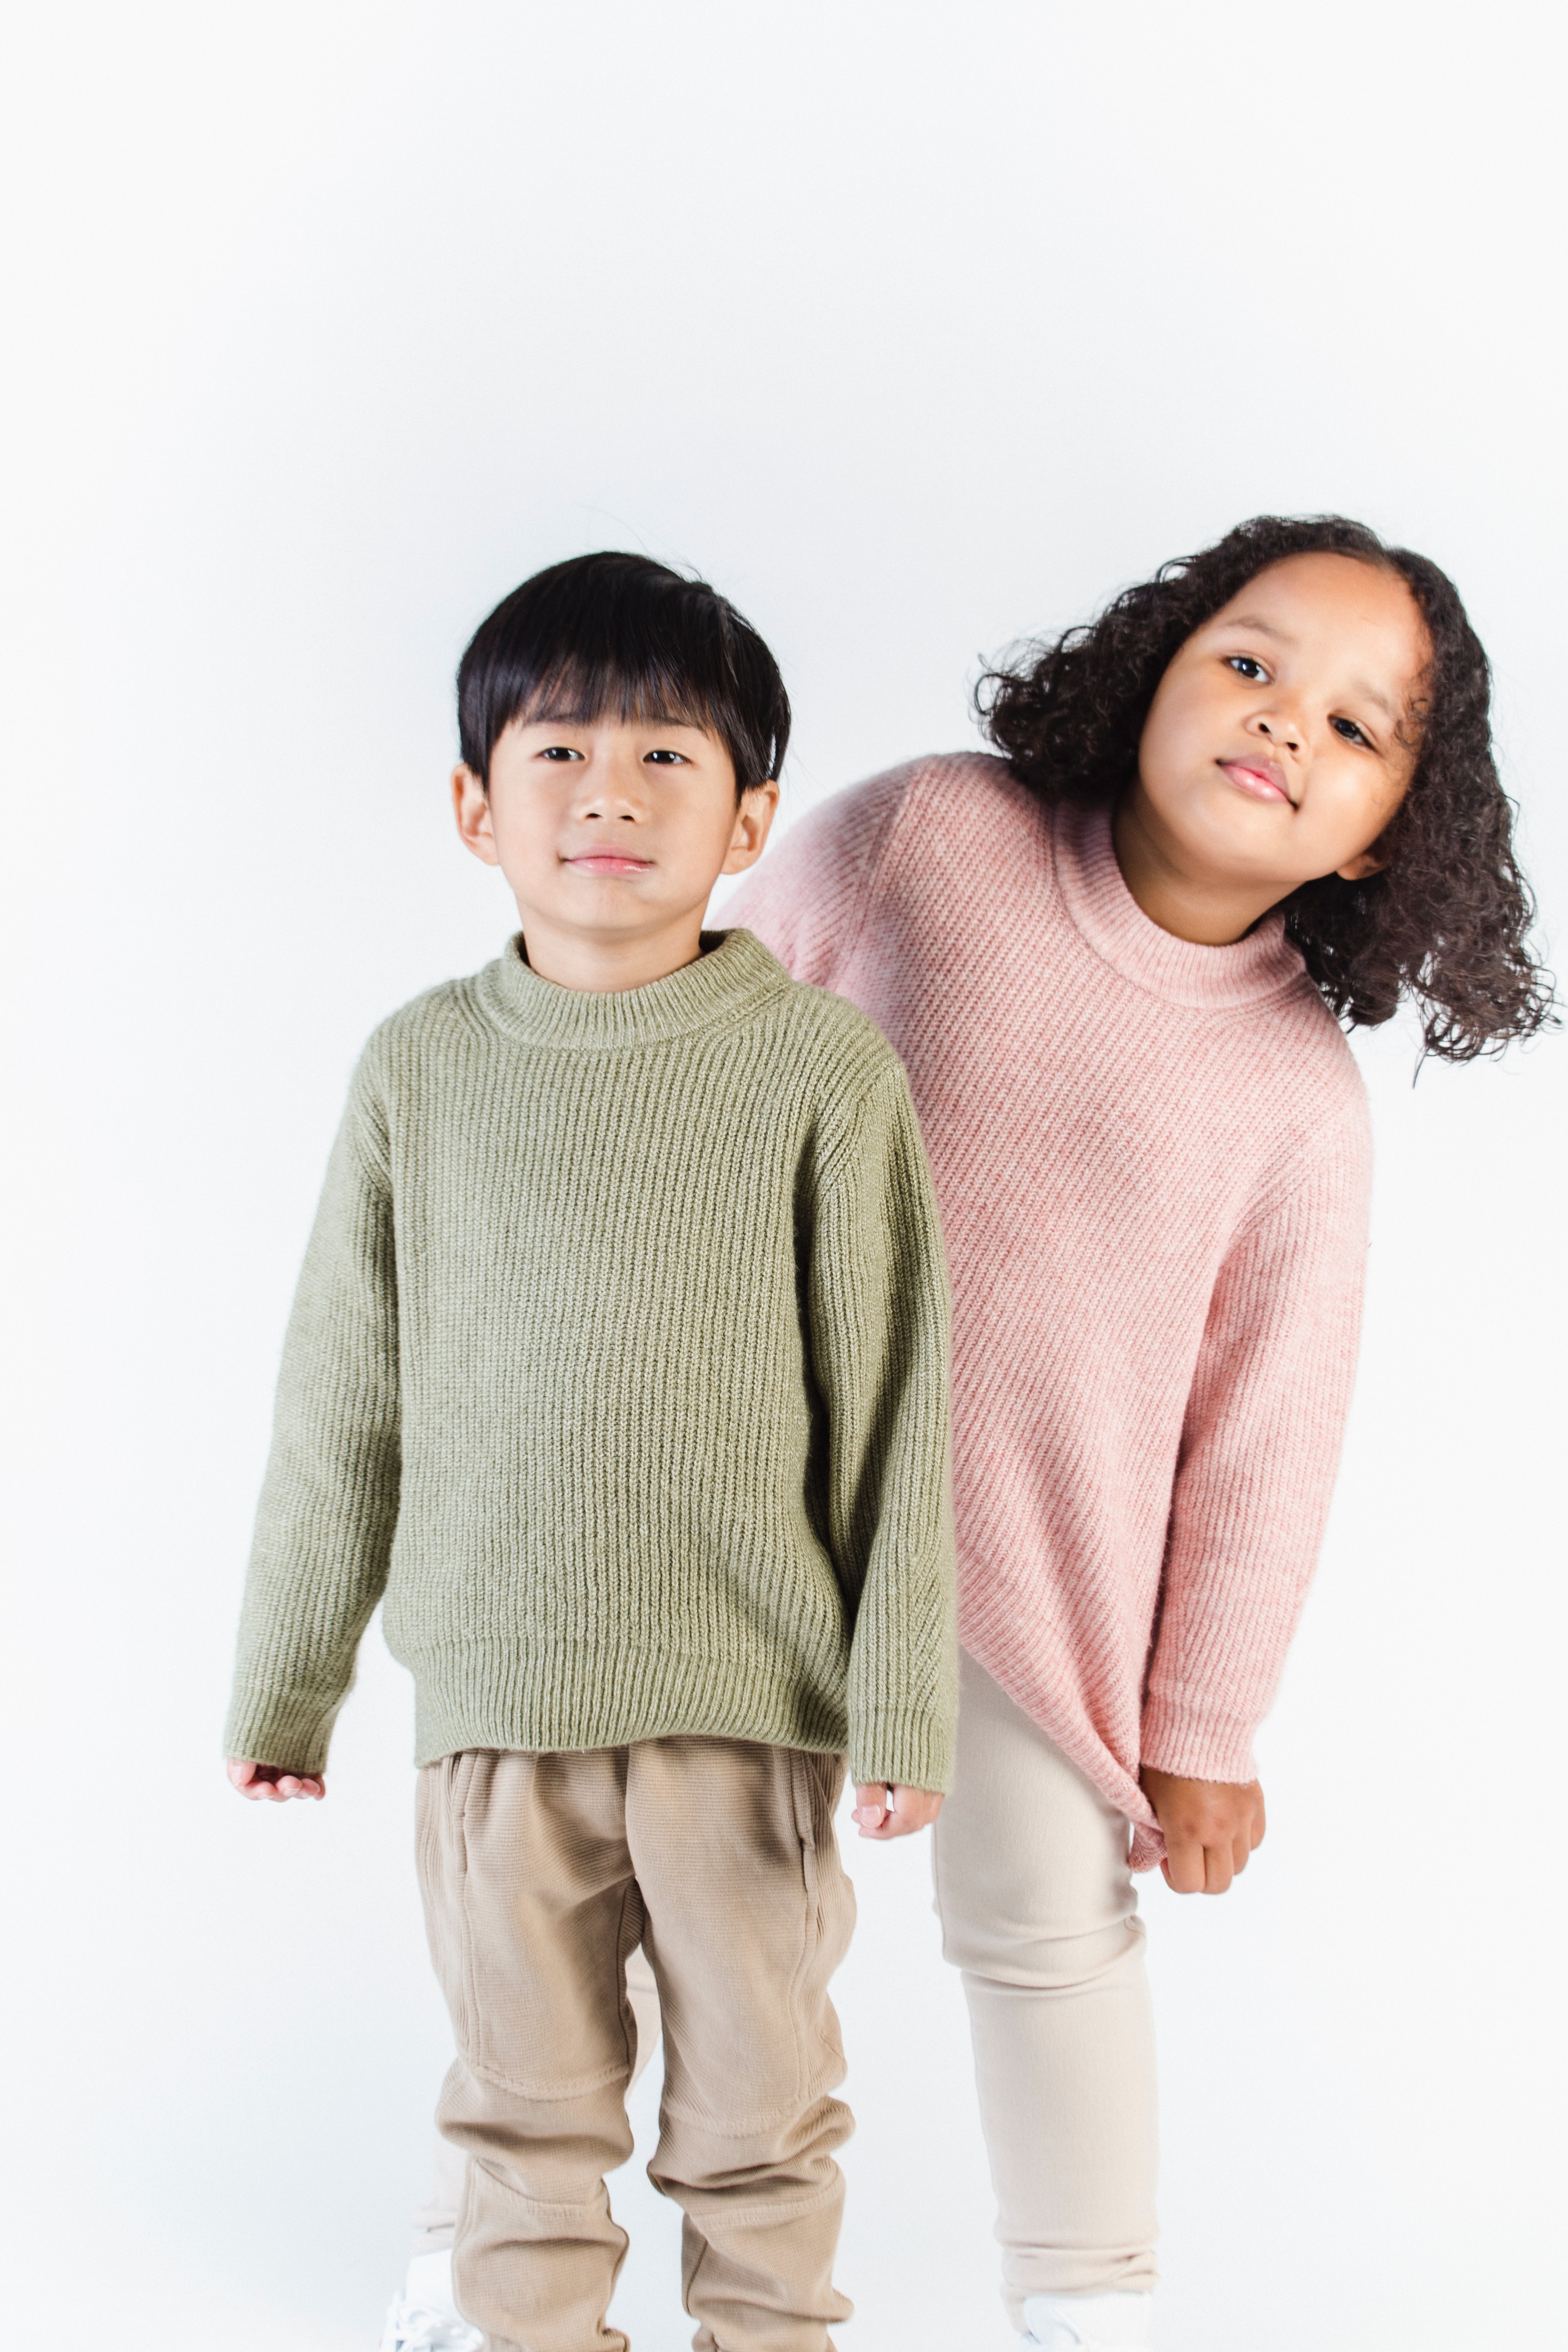 7 Notable Tips To Buy Clothes For Your Kids